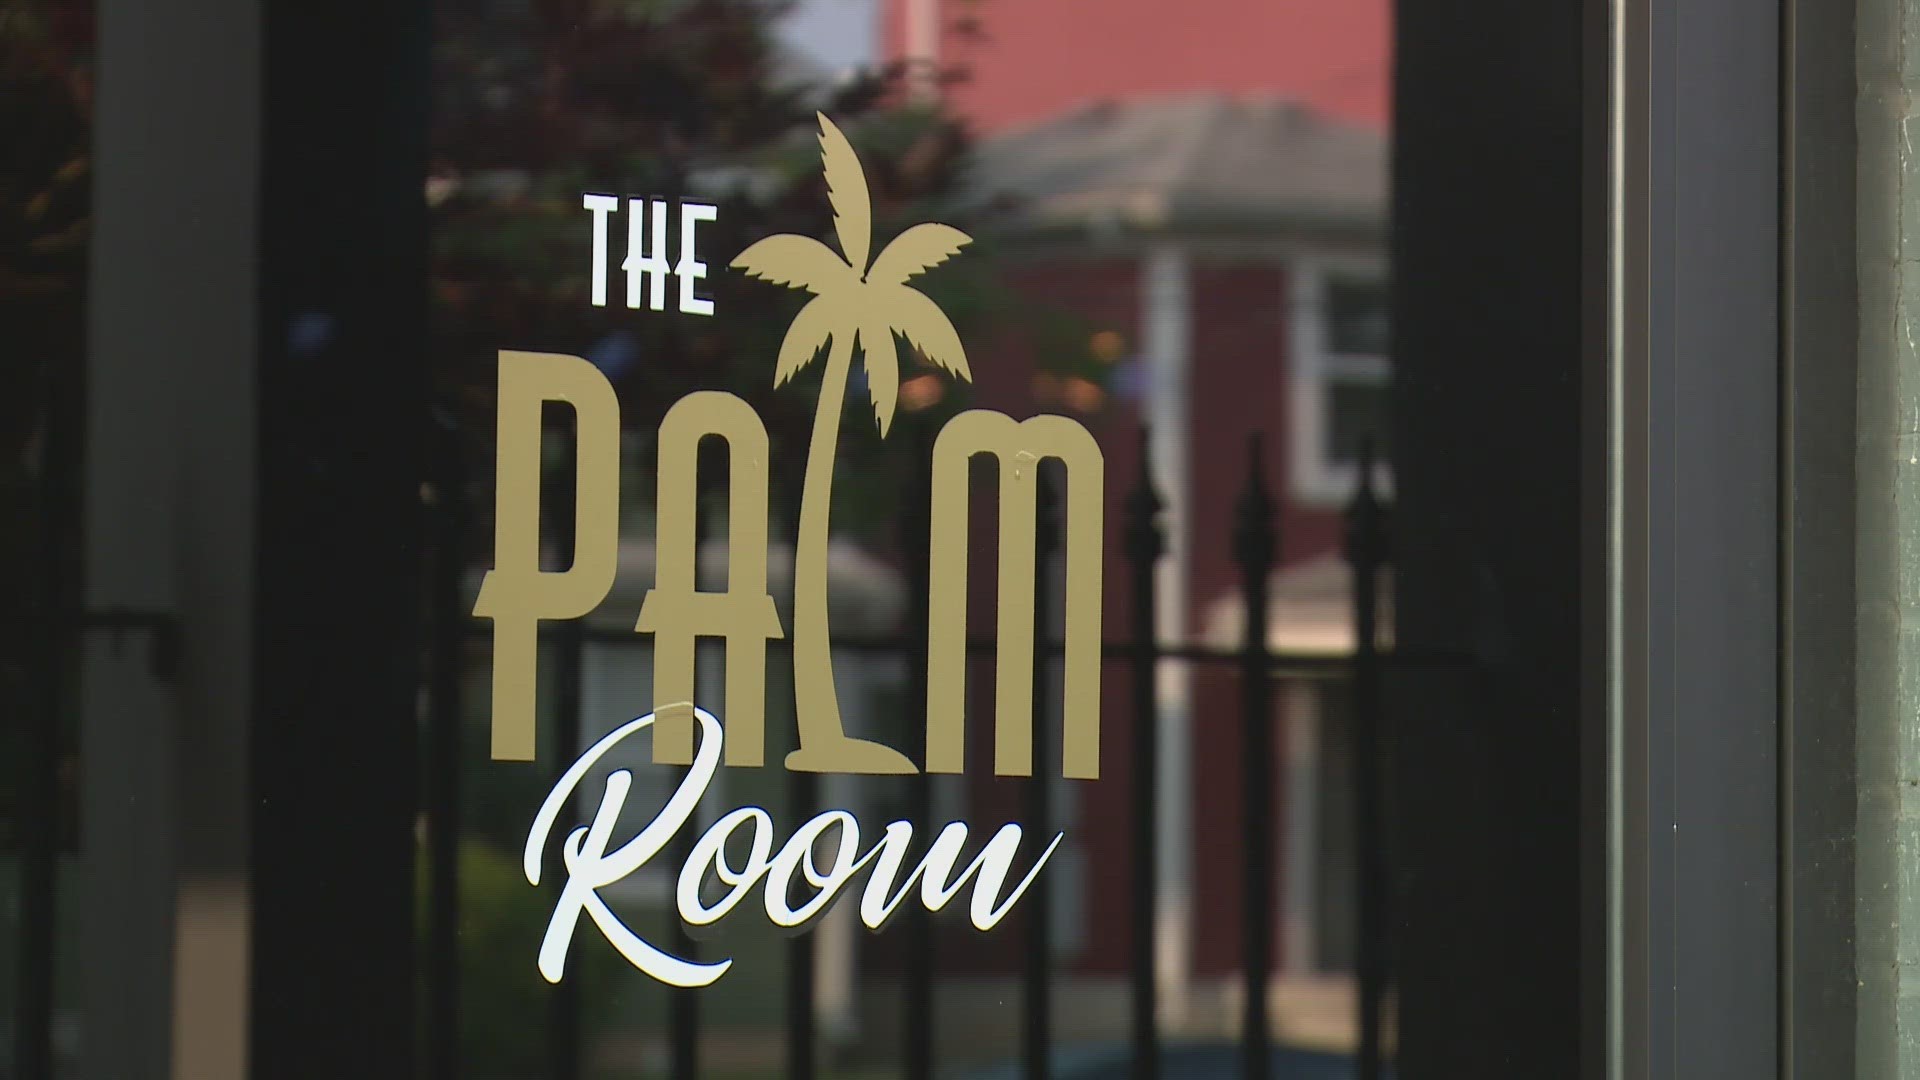 "The Palm Room" in the Russell neighborhood has a history in west Louisville dating back to the '50s.